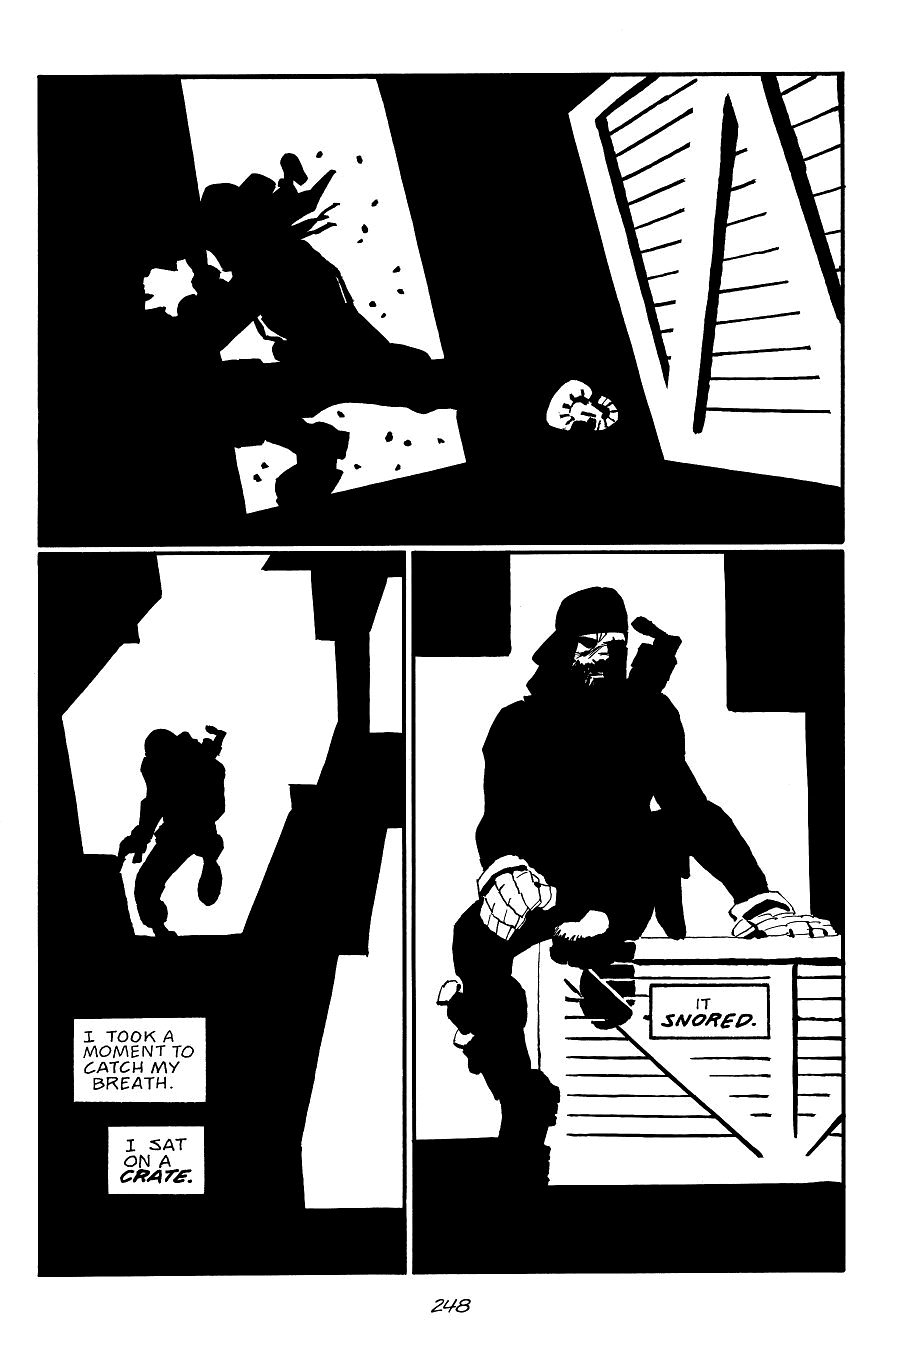 page 248 of sin city 7 hell and back